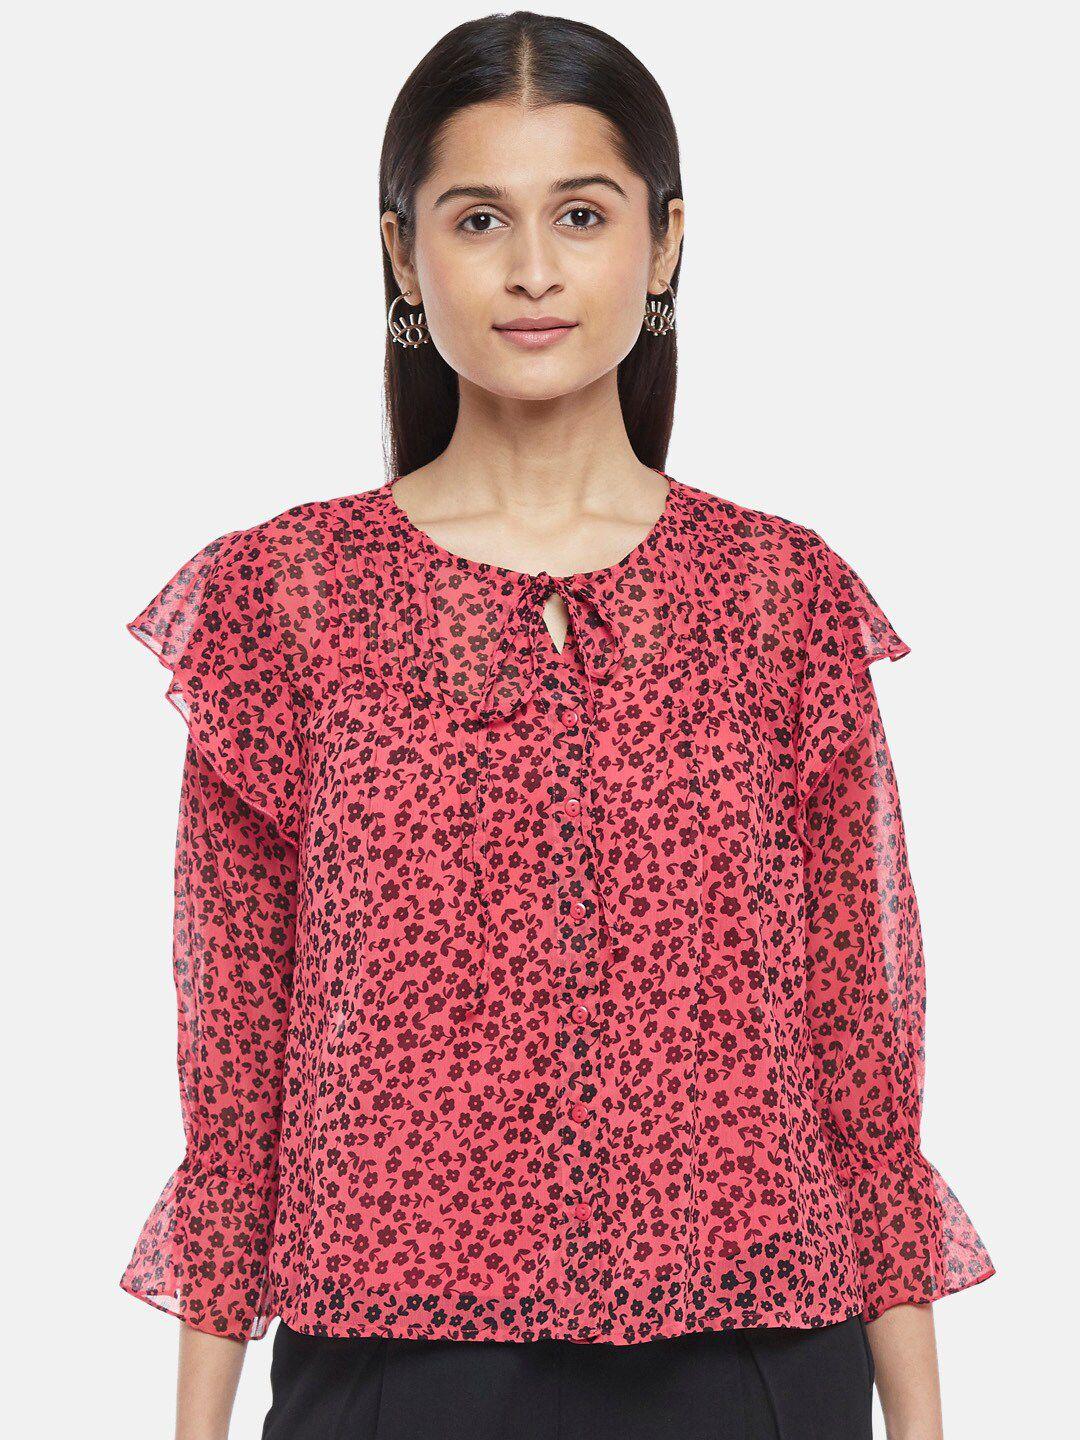 honey by pantaloons red floral print tie-up neck boxy top